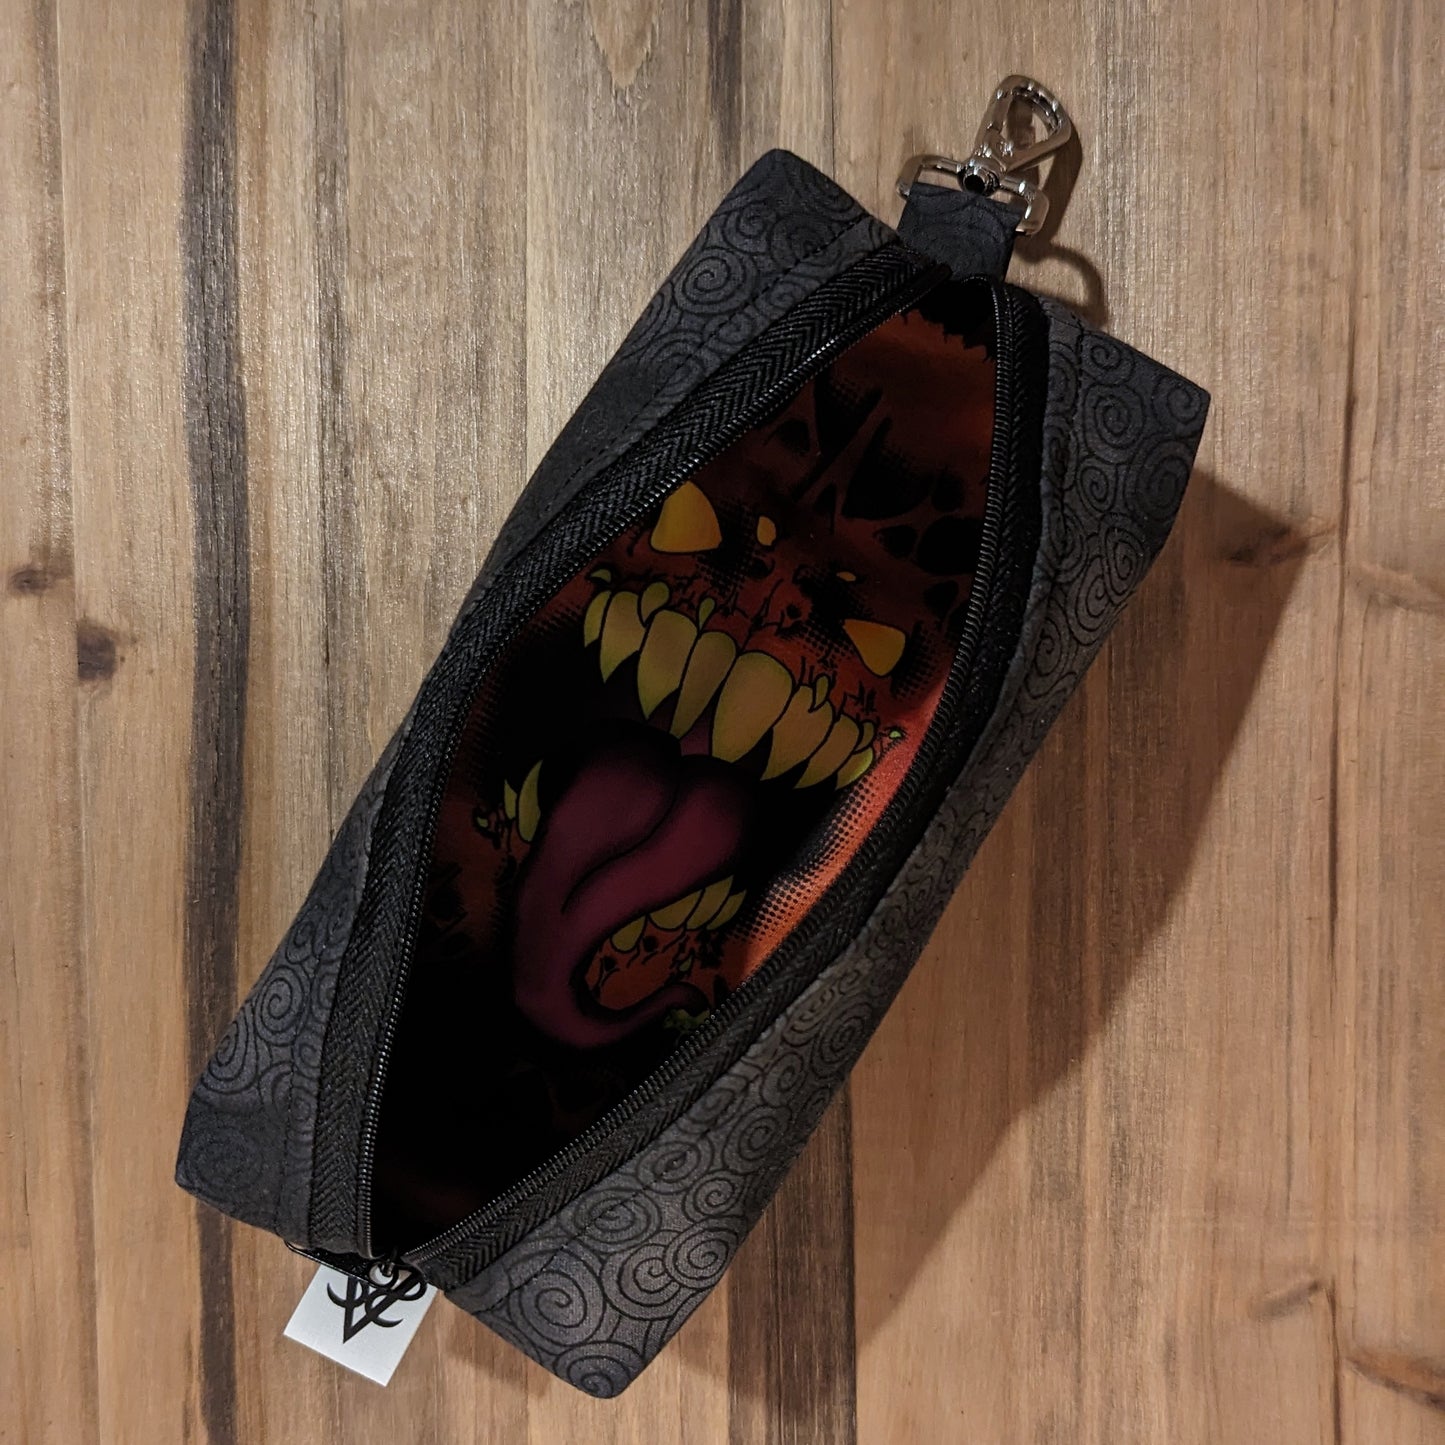 The Bag of Devouring in the spiraling black open to show the mimic face inside, the keychain clip at the top, and the Aras Sivad Studio tag at the bottom.